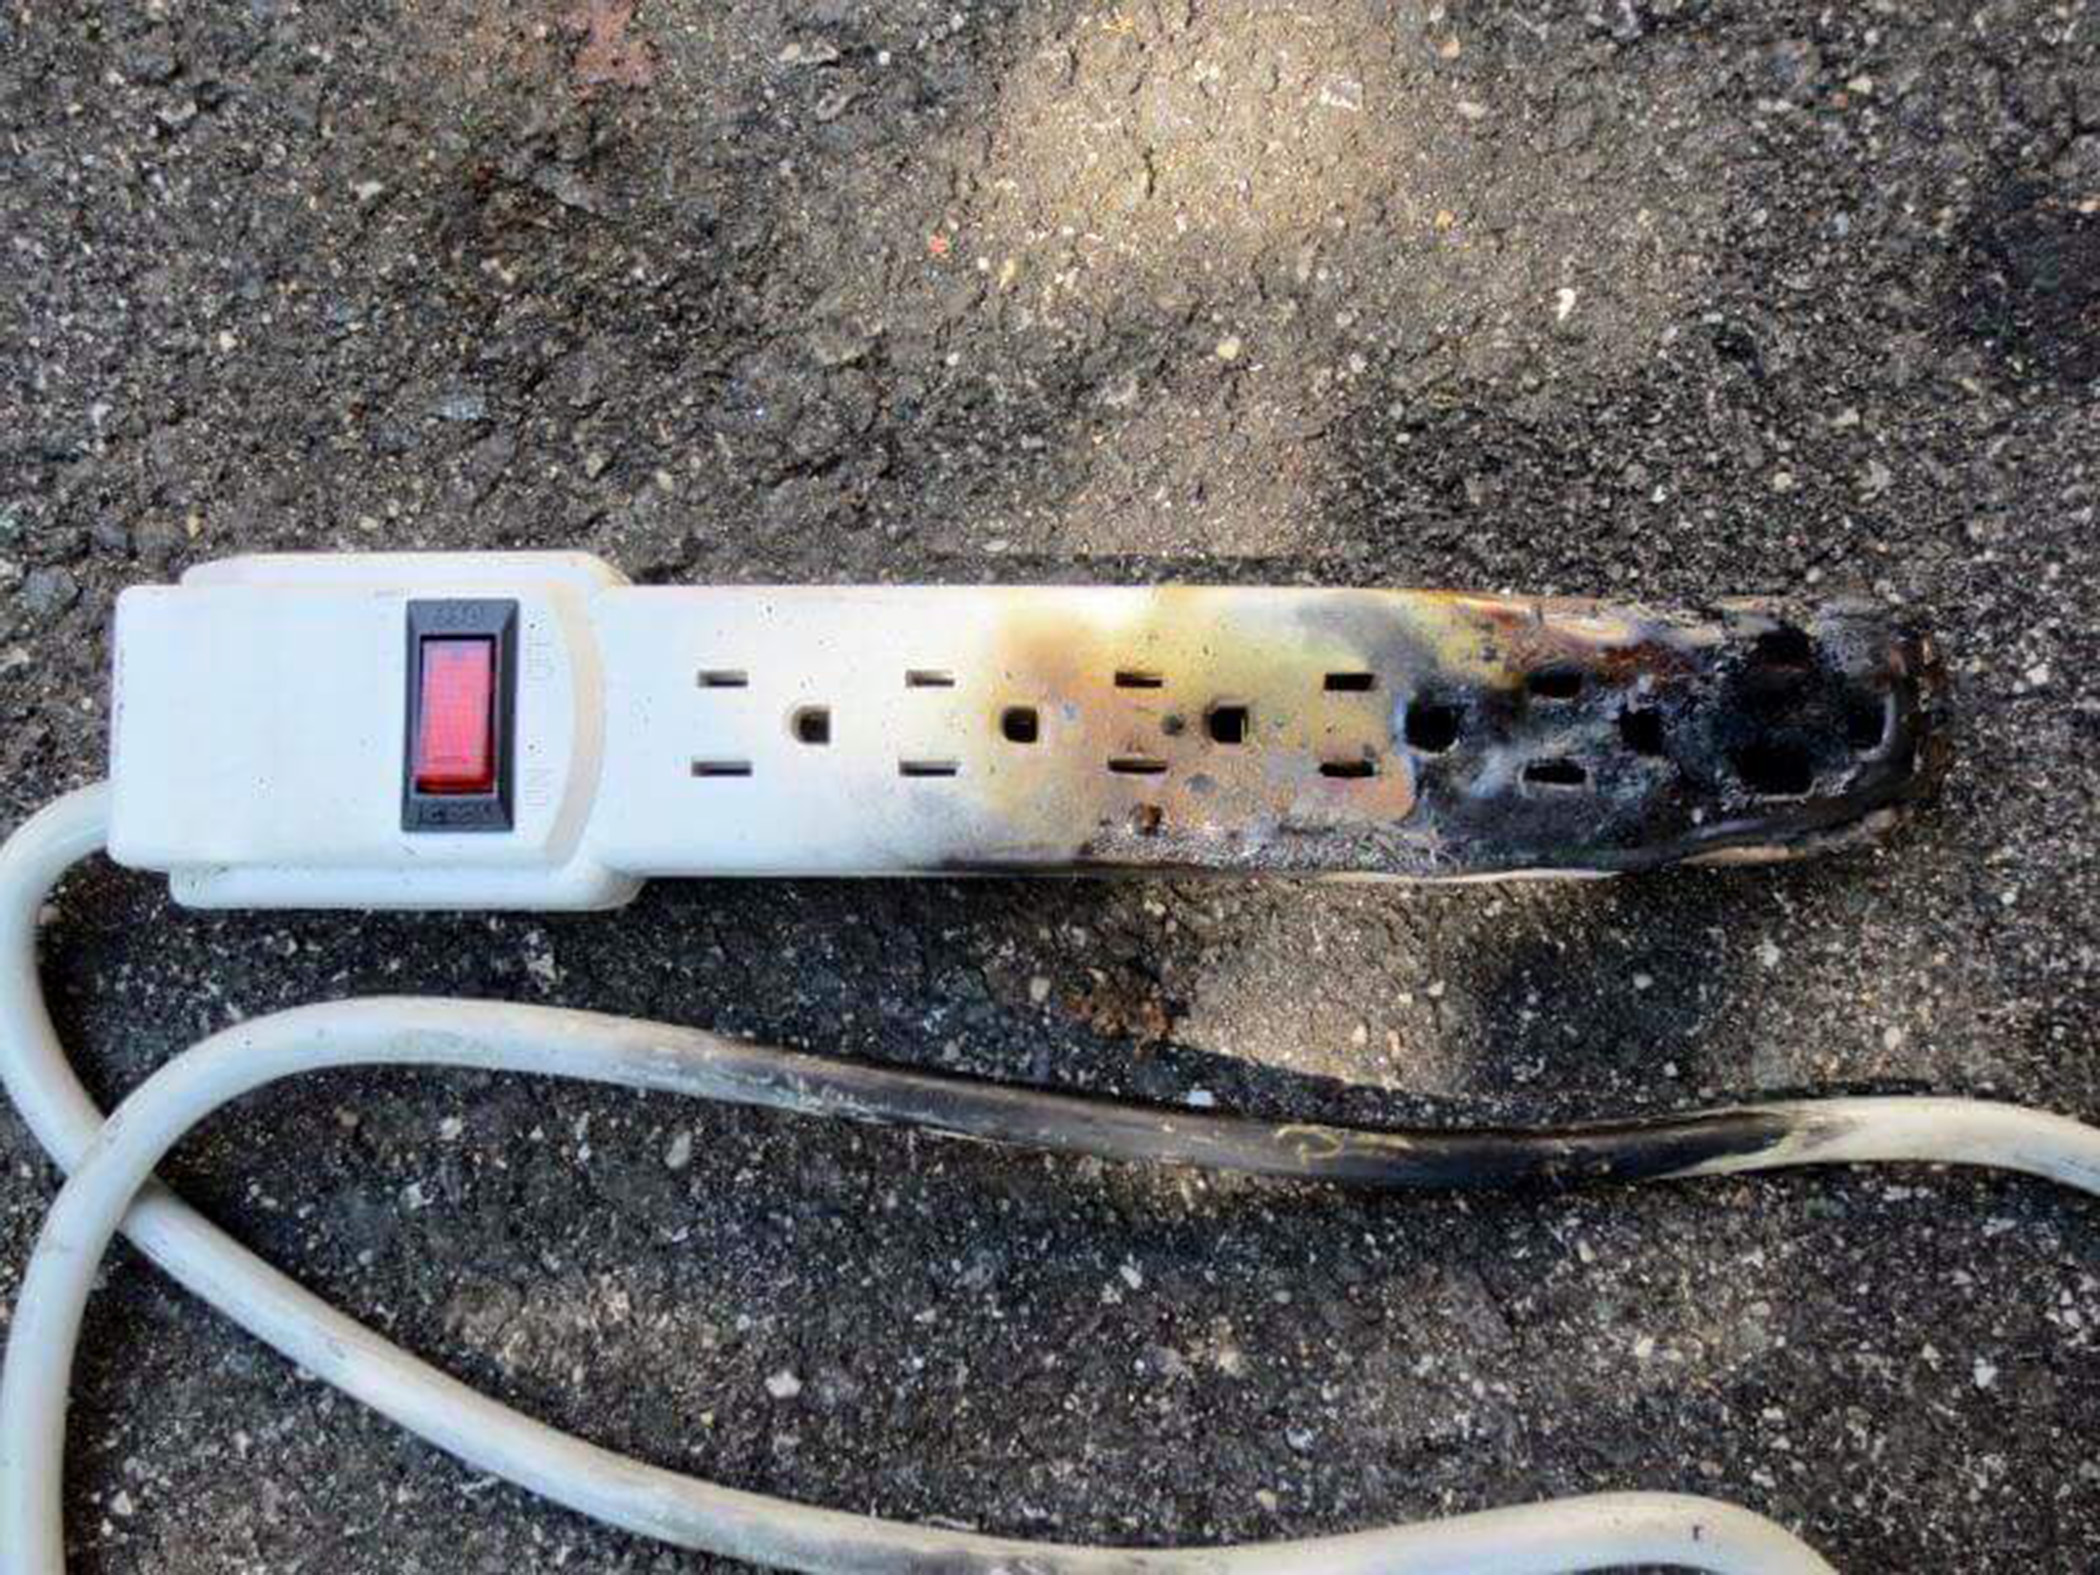 Be safe with electrical power strips and heaters > F.E. Warren Air ...